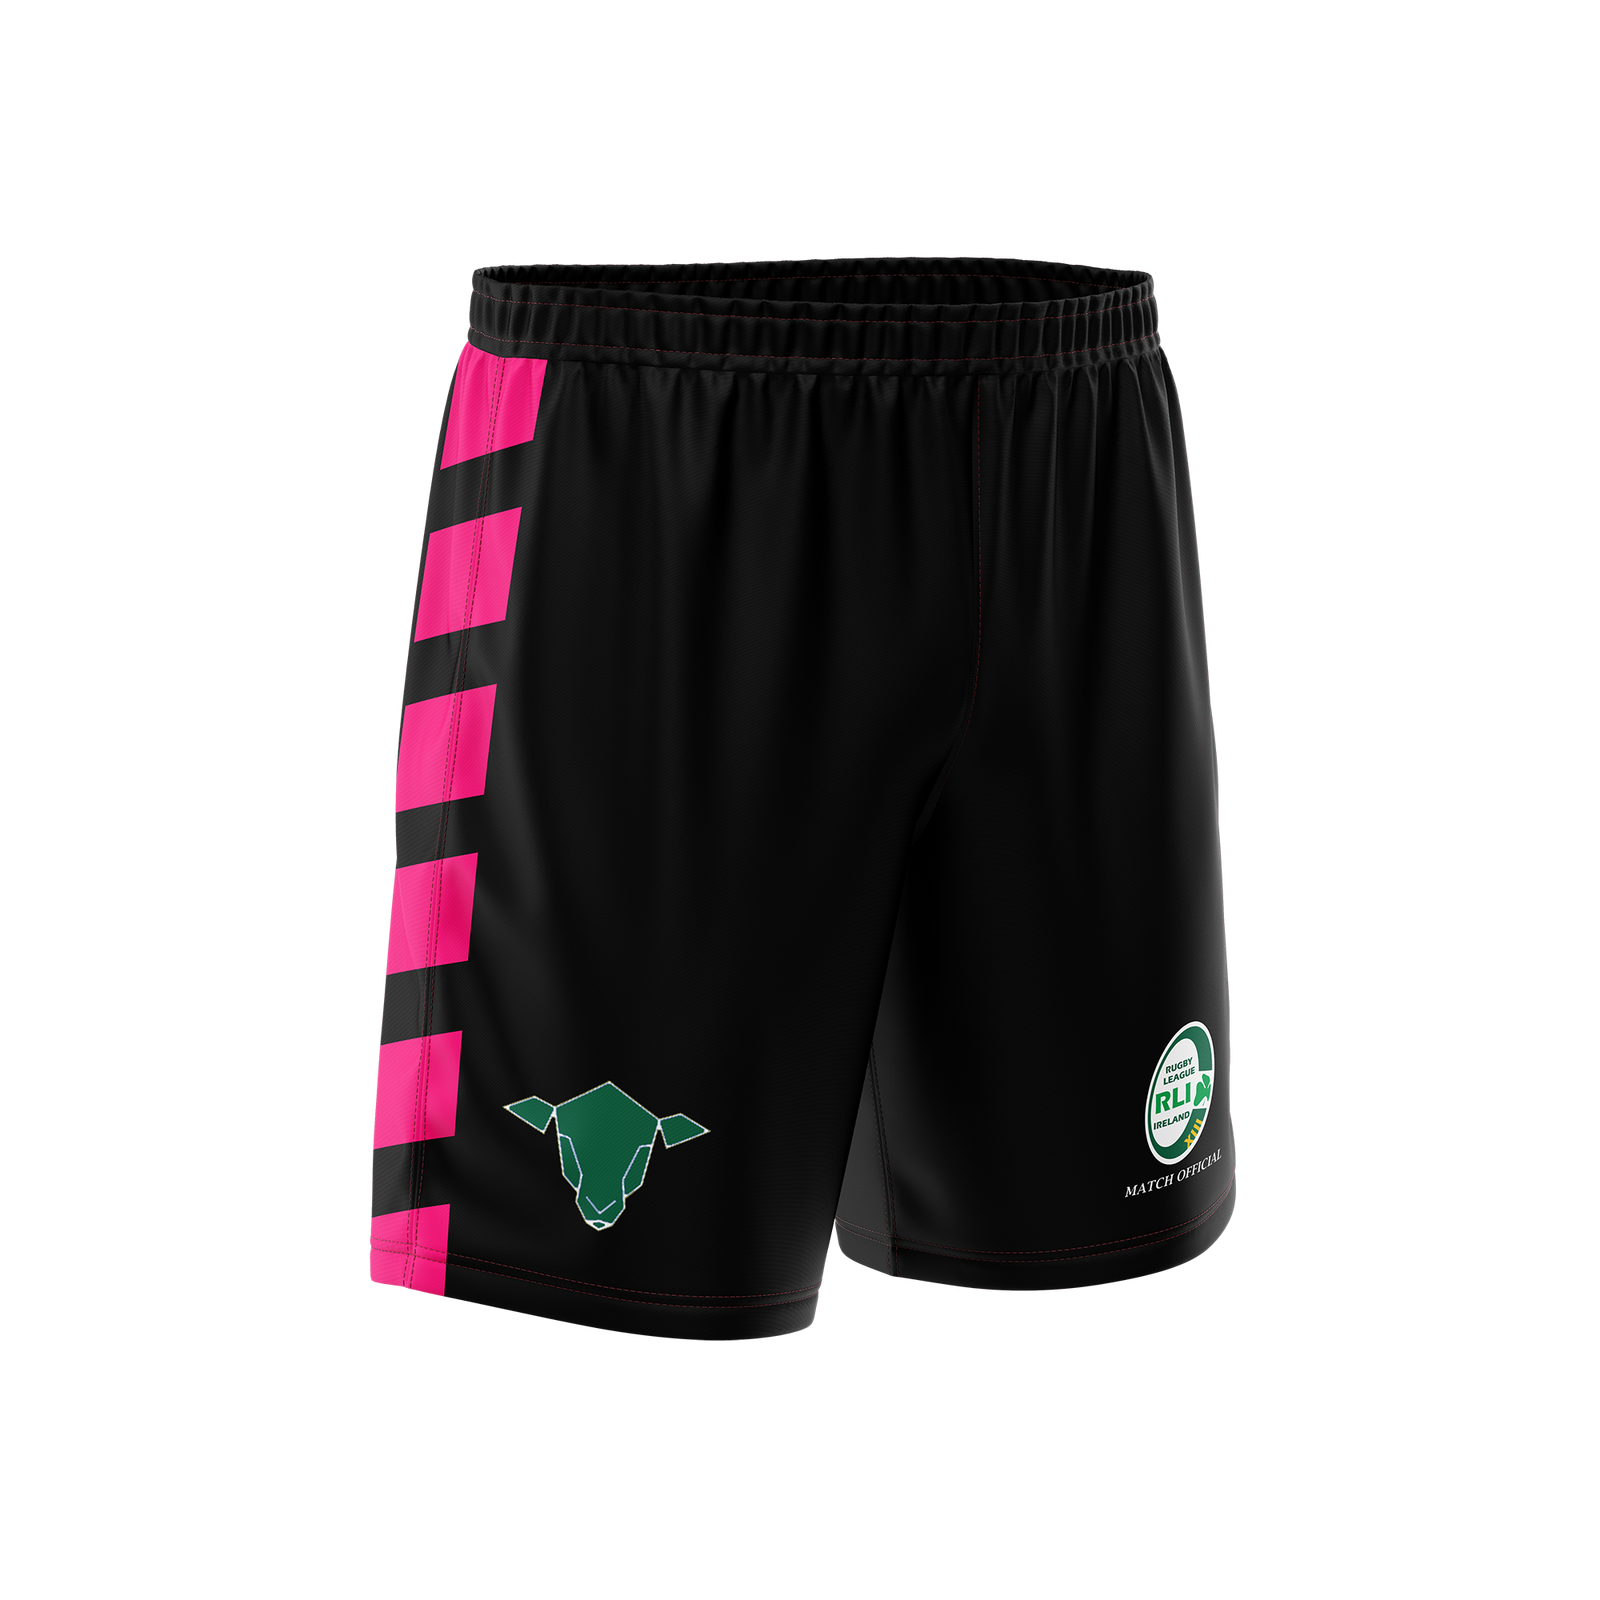 Match Official Game Shorts